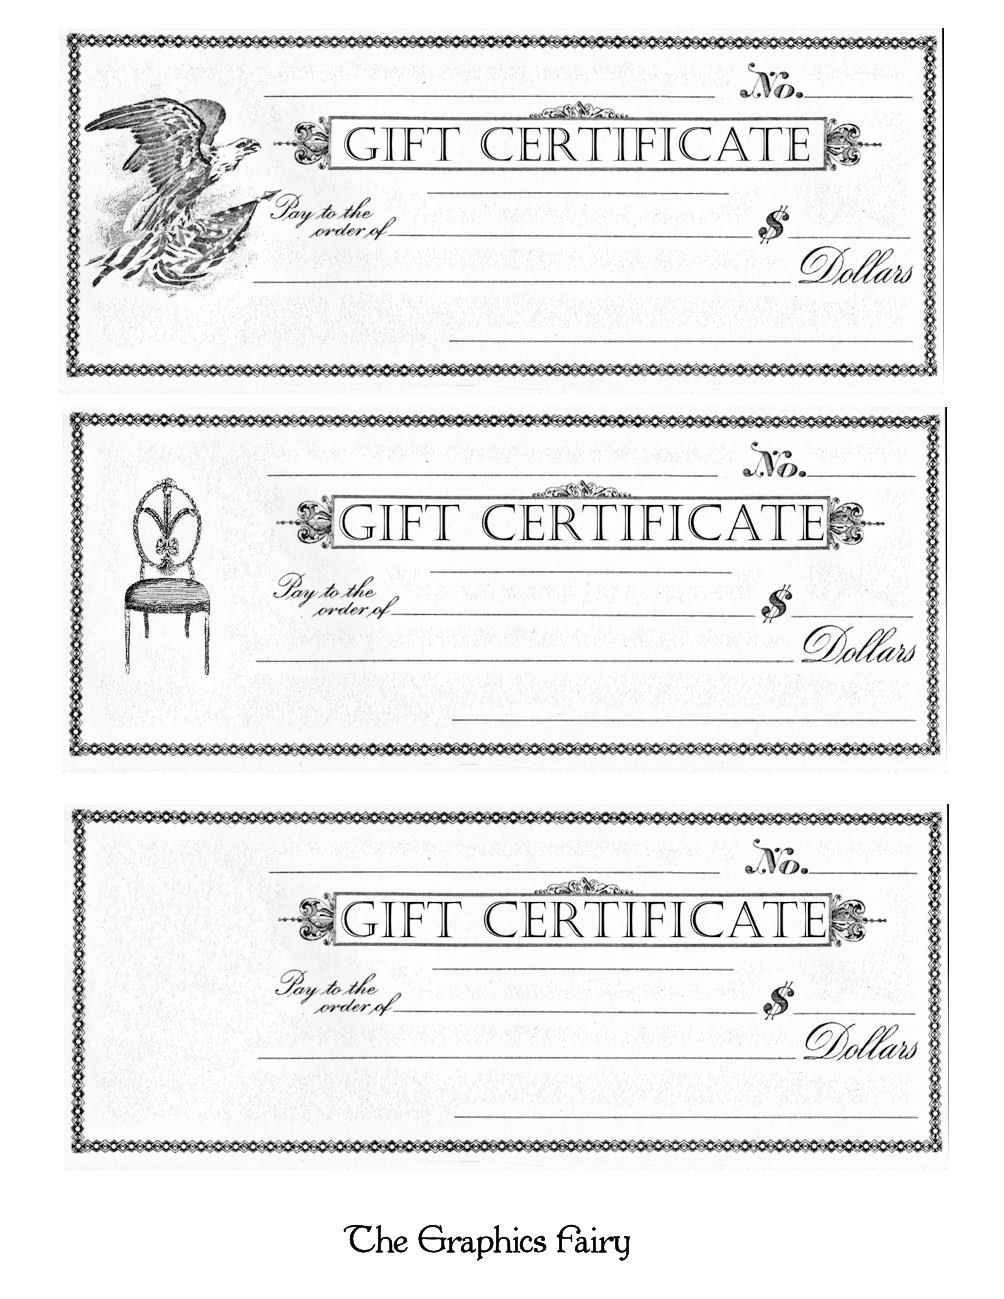 free-printable-gift-certificates-the-graphics-fairy